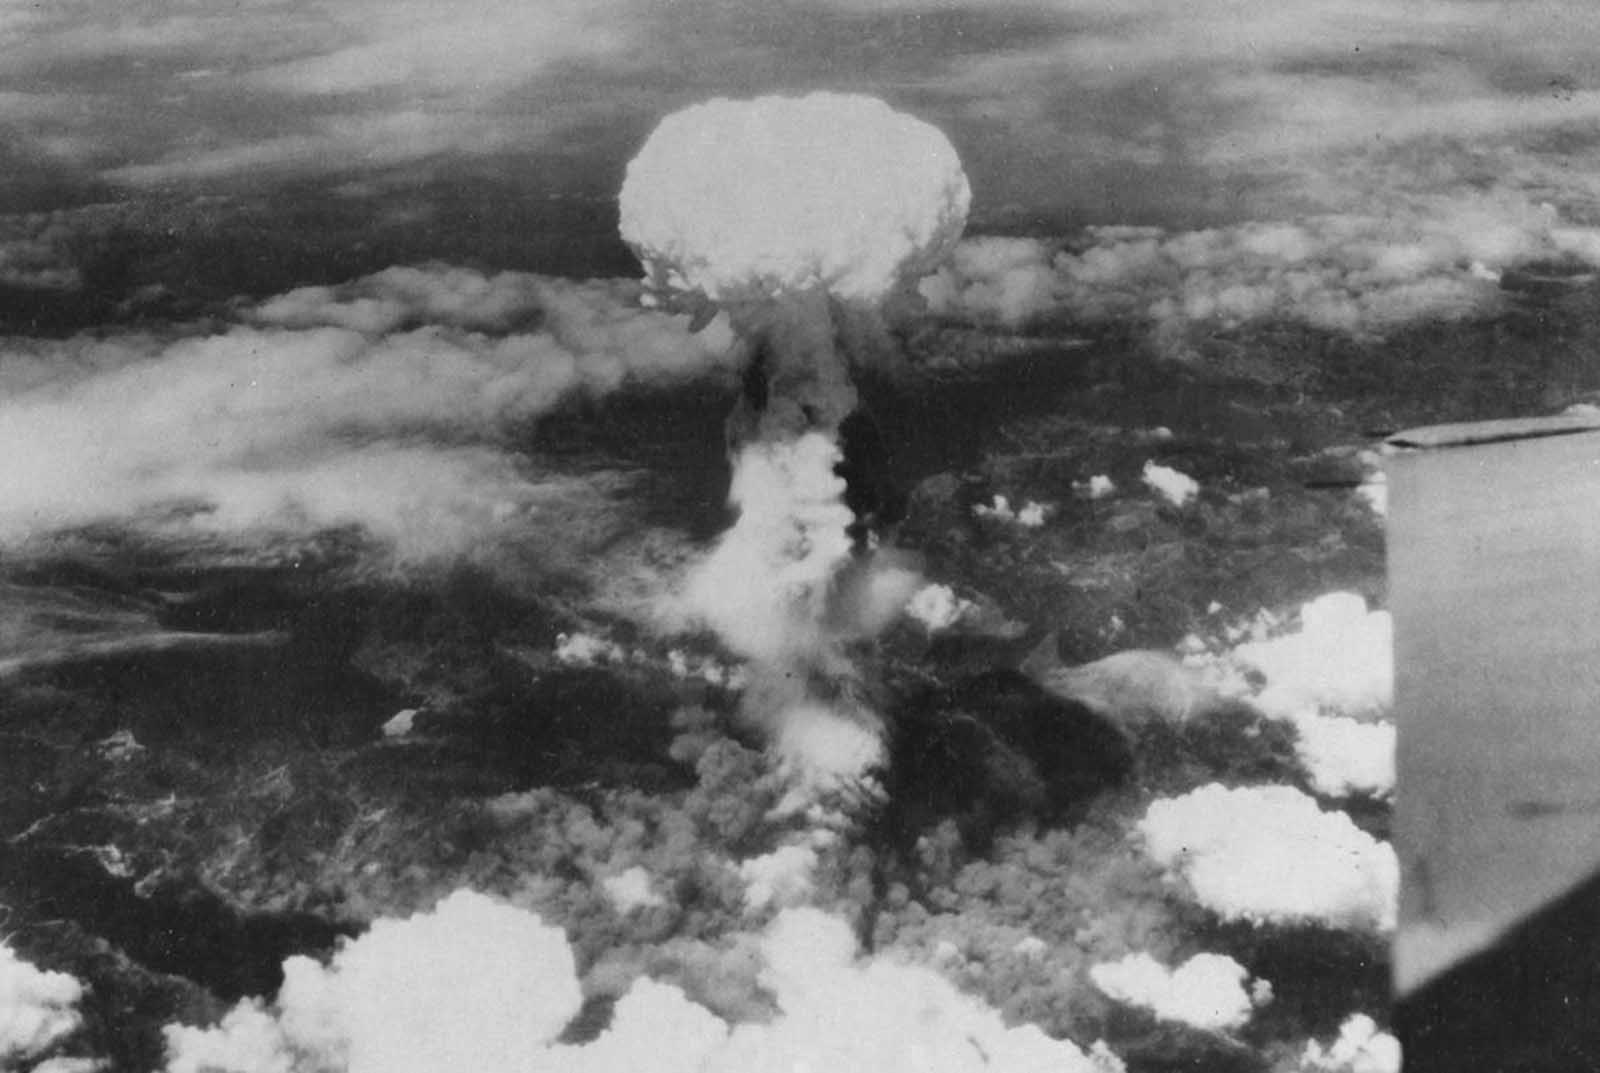 'Fat Man' was dropped from the B-29 bomber Bockscar, detonating at 11:02 AM, at an altitude of about 1,650 feet (500 m) above Nagasaki. An estimated 39,000 people were killed outright by the bombing; a further 25,000 were injured.